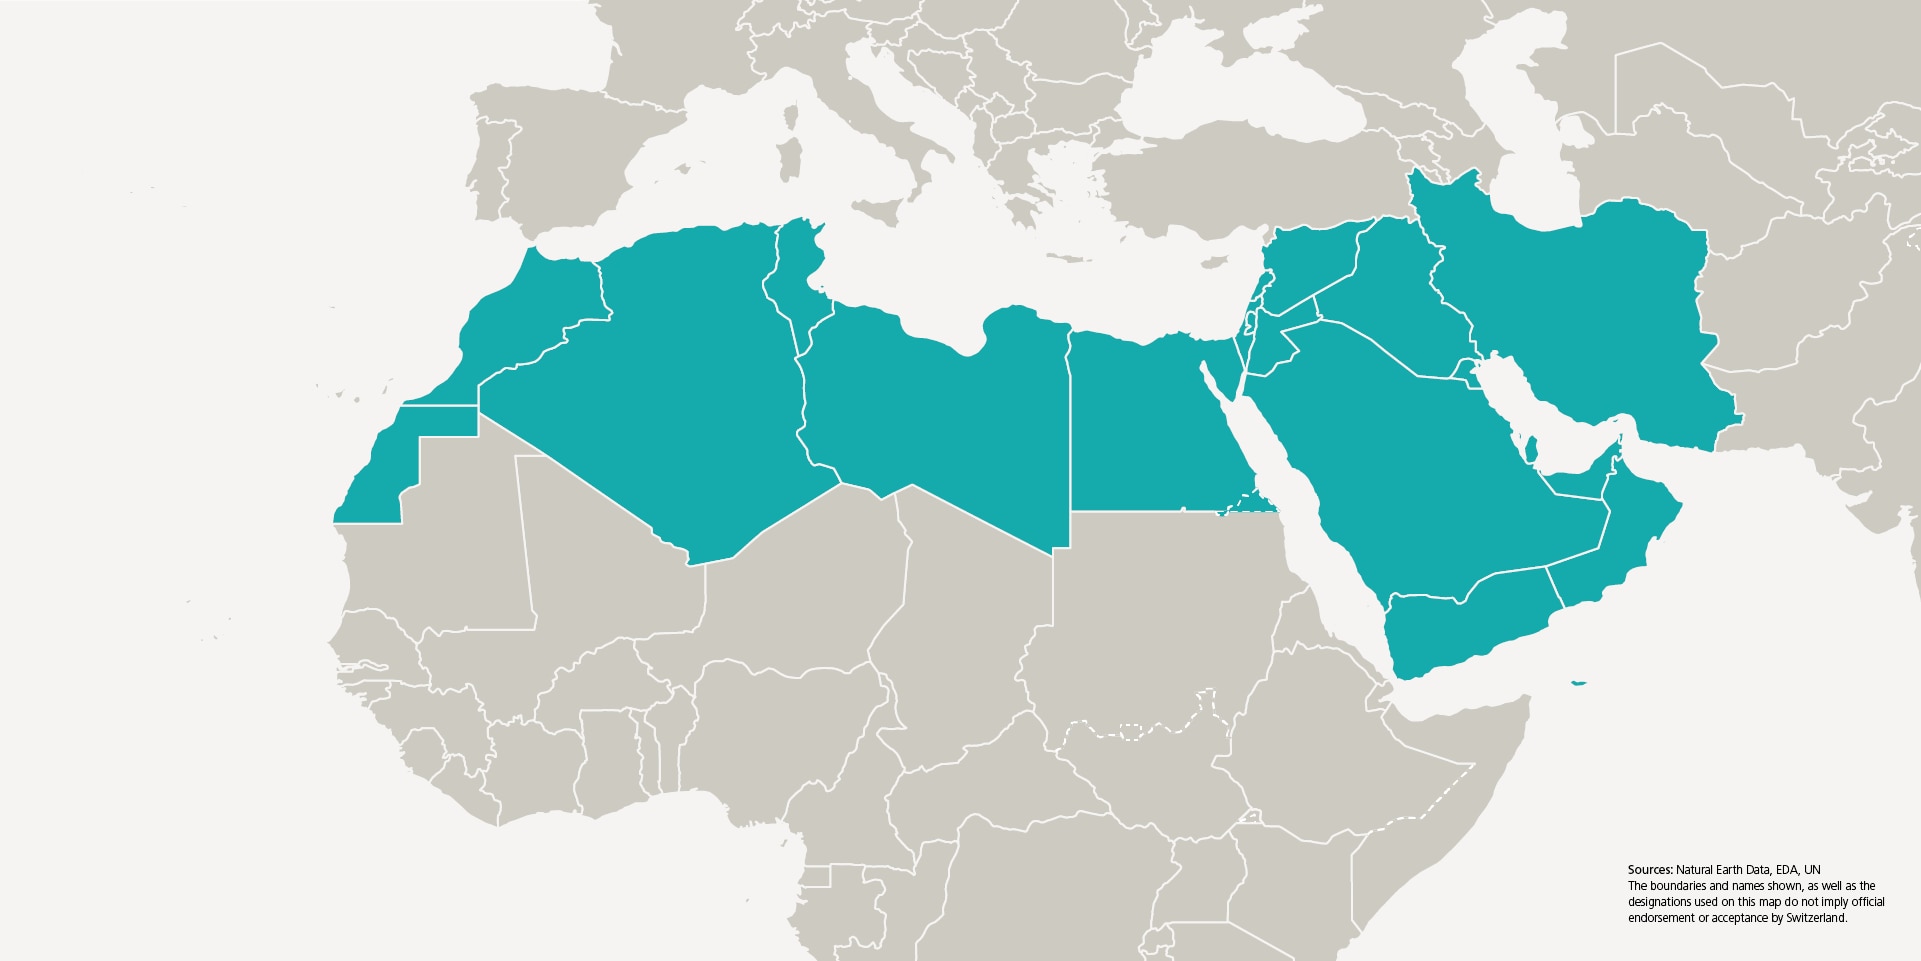 A graphic shows a section of a world map. The 18 countries of the MENA (Middle East and North Africa) region are highlighted in colour.